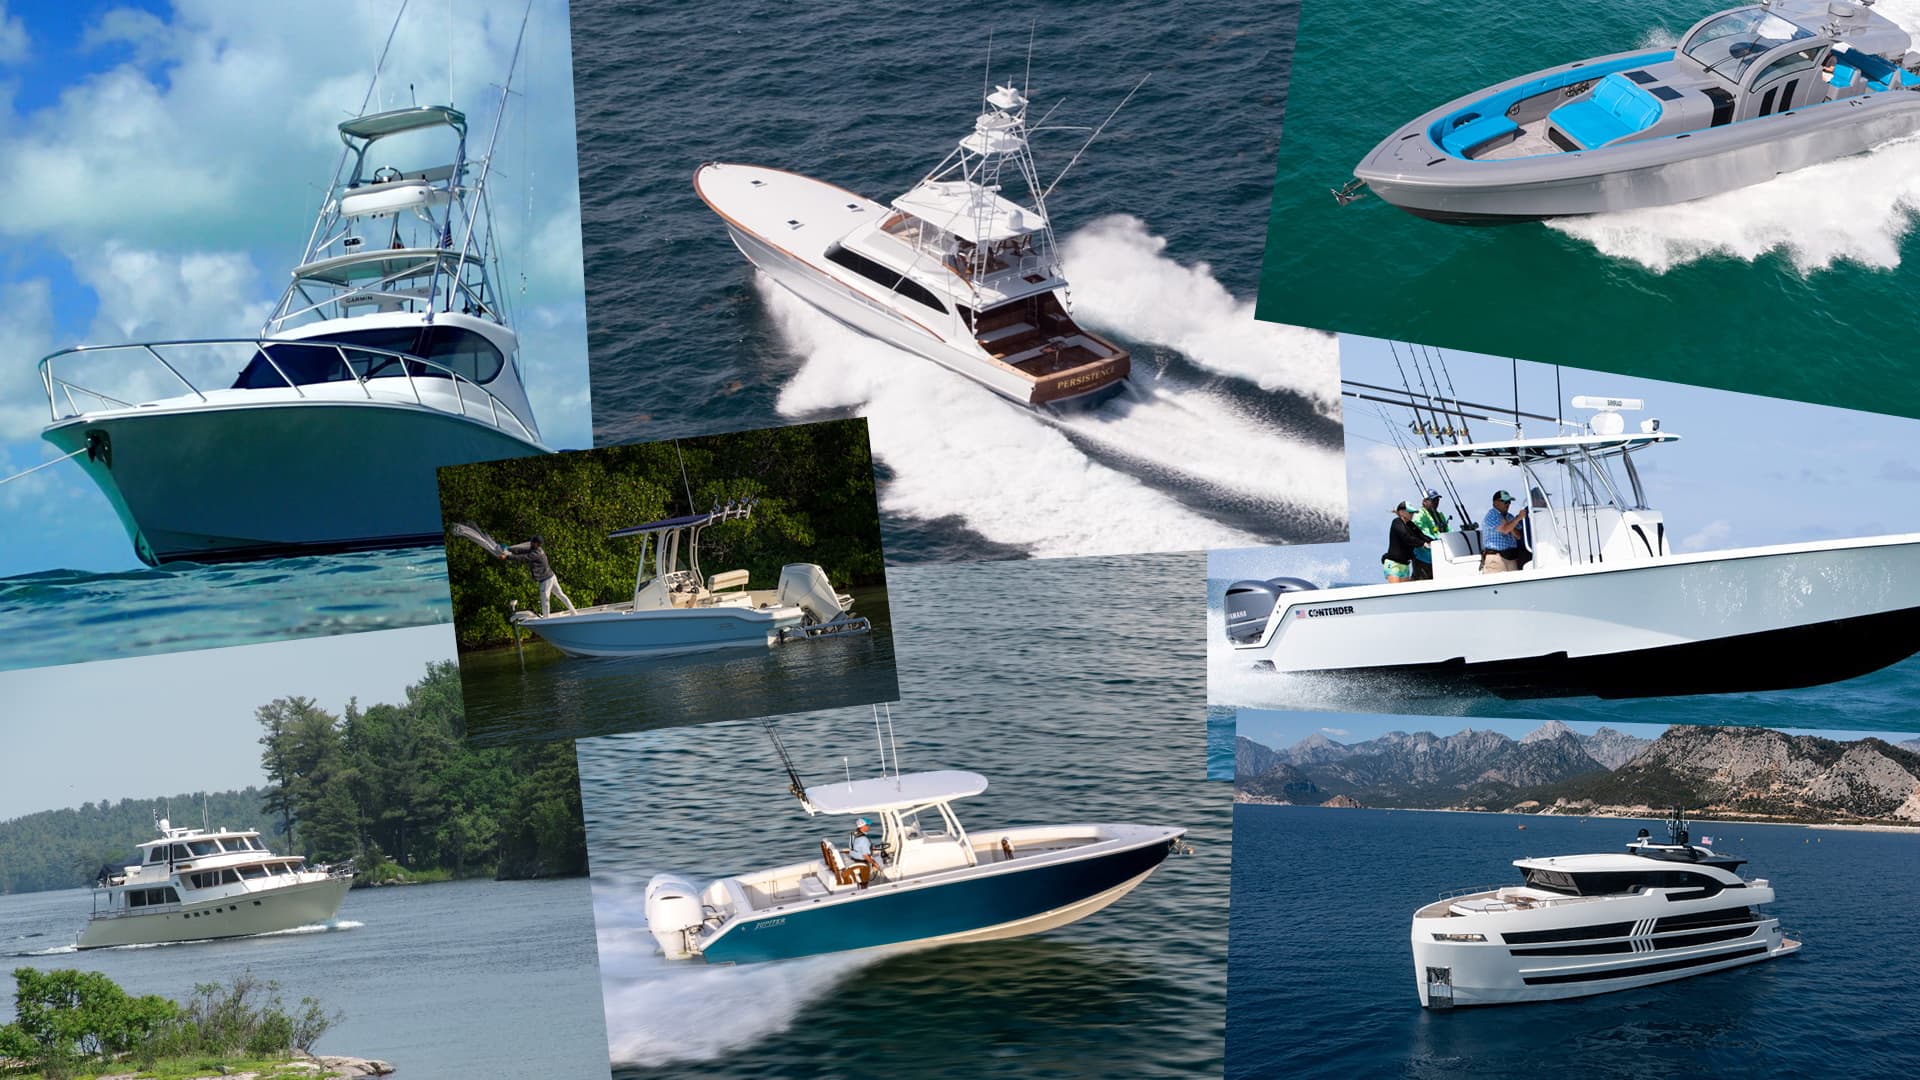 70 Most Seaworthy Gift Ideas For Boat Owners » All Gifts Considered